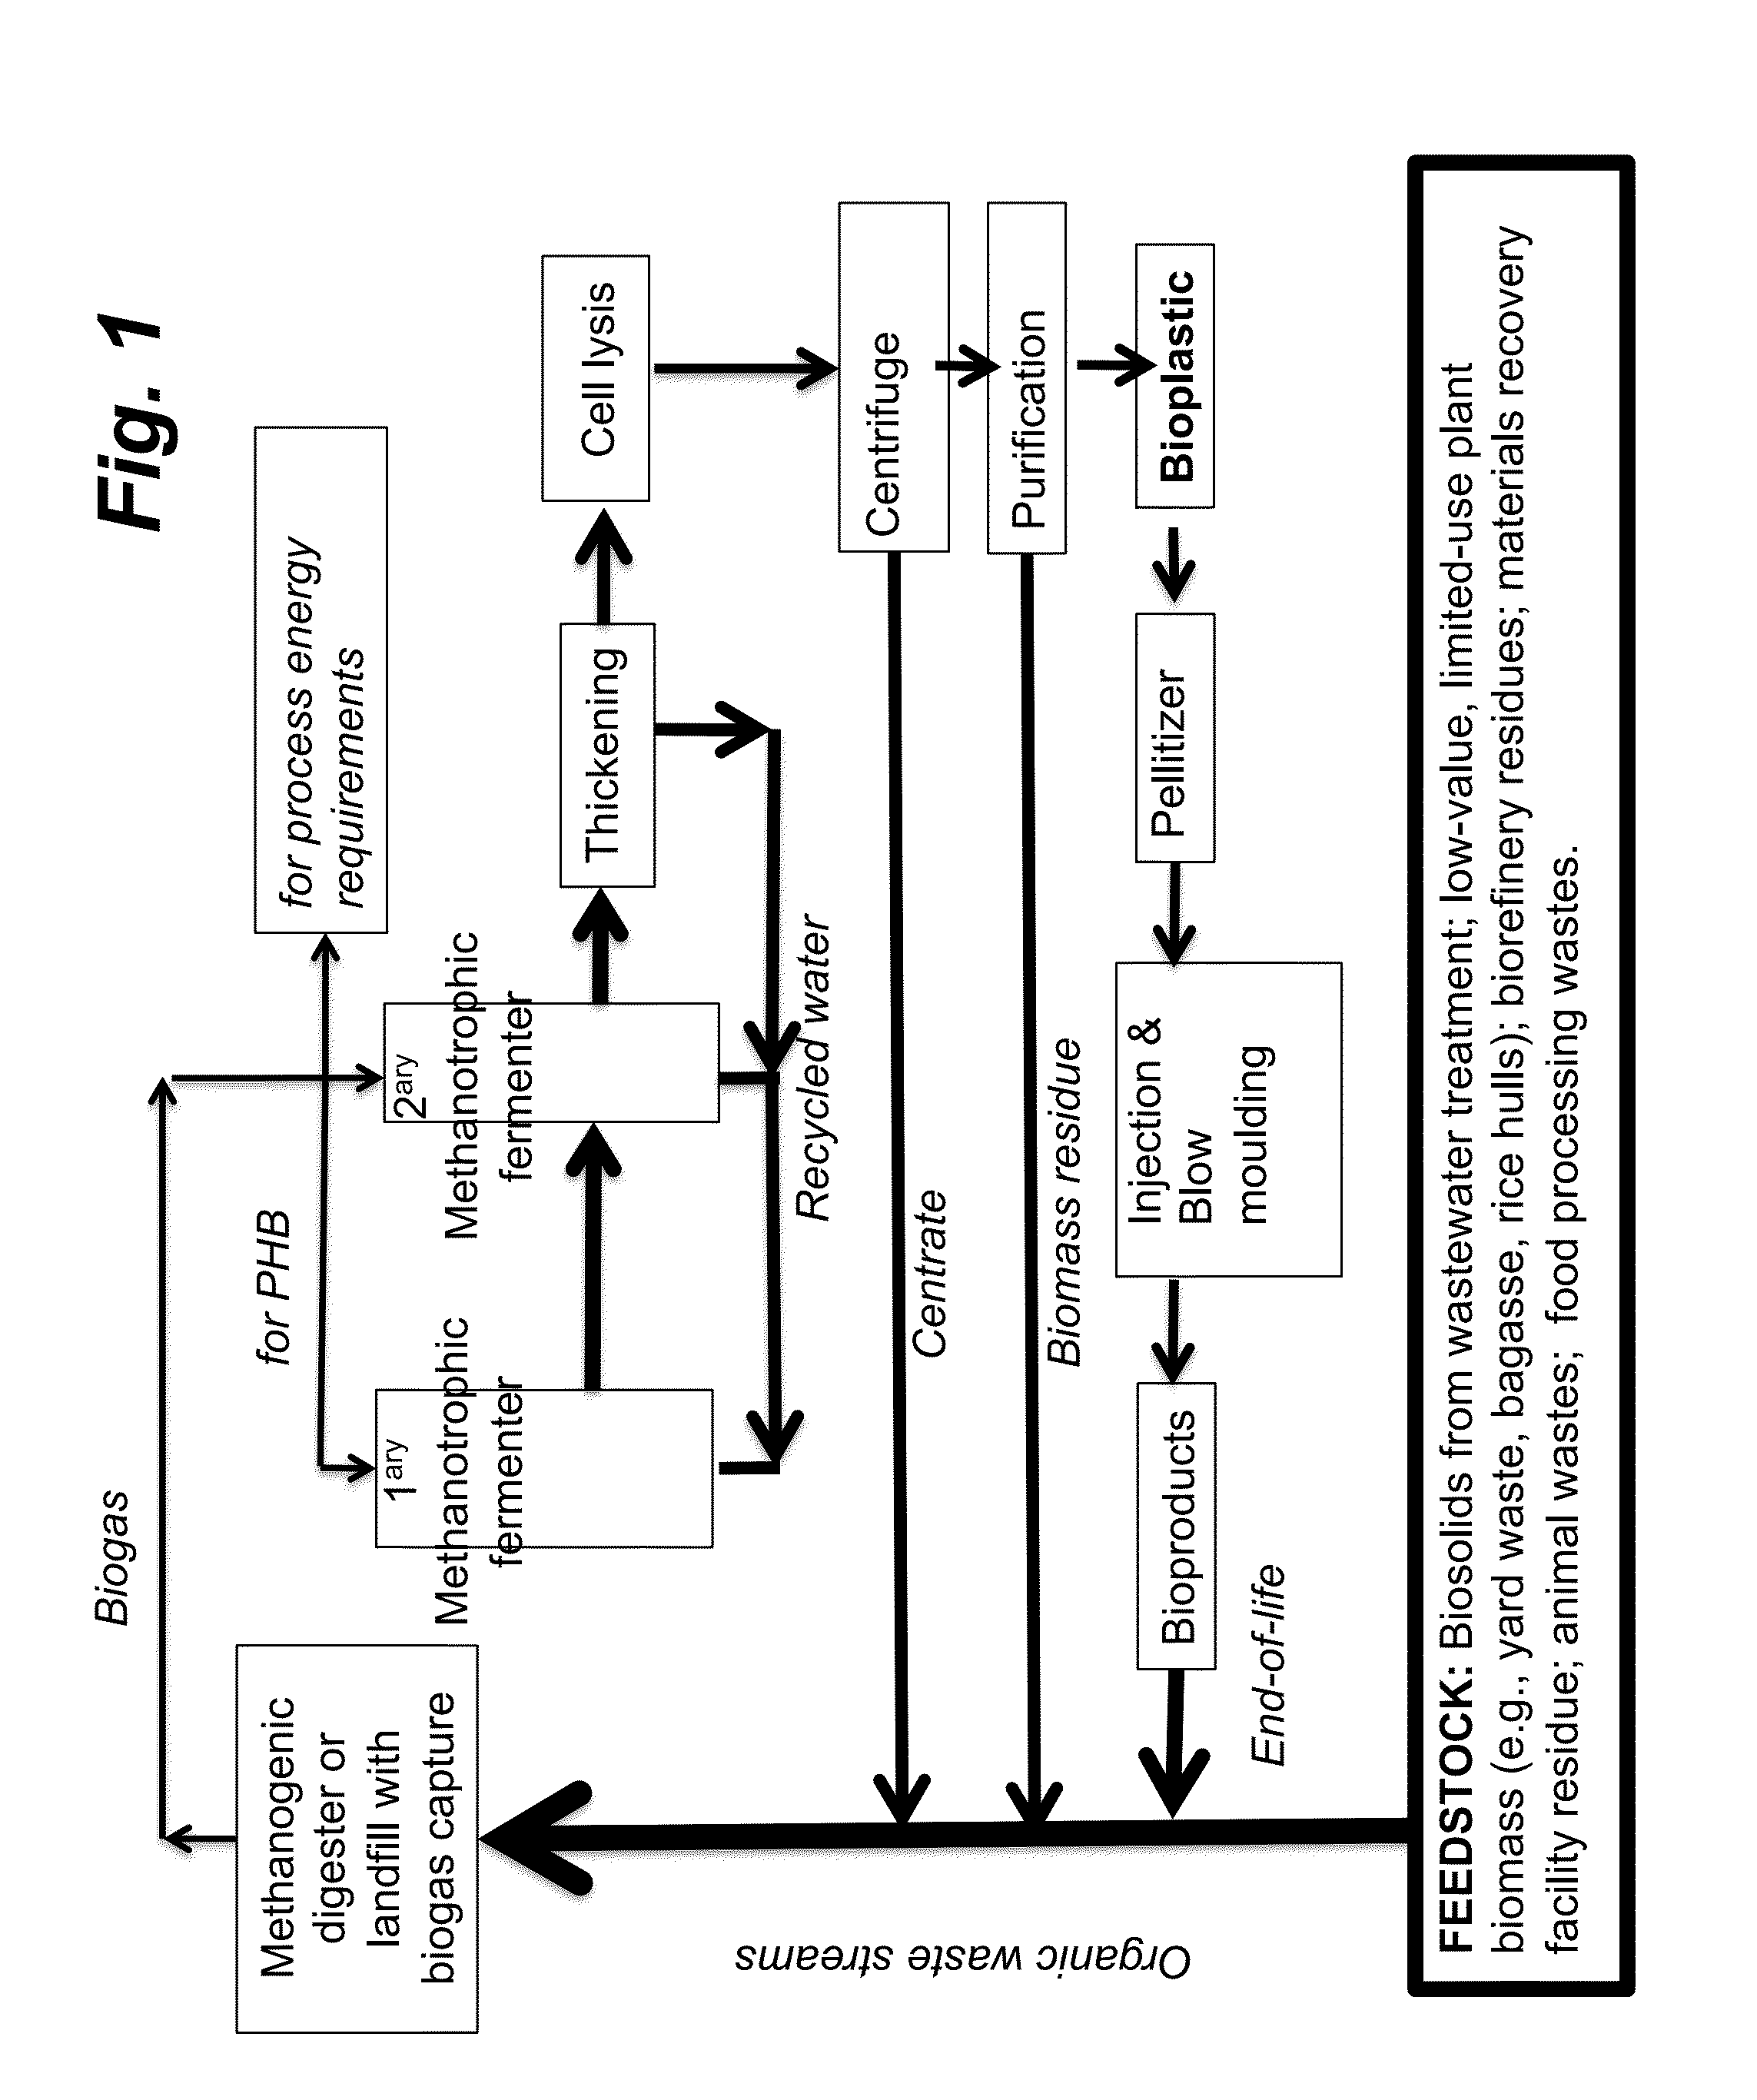 Production of PHA using Biogas as Feedstock and Power Source